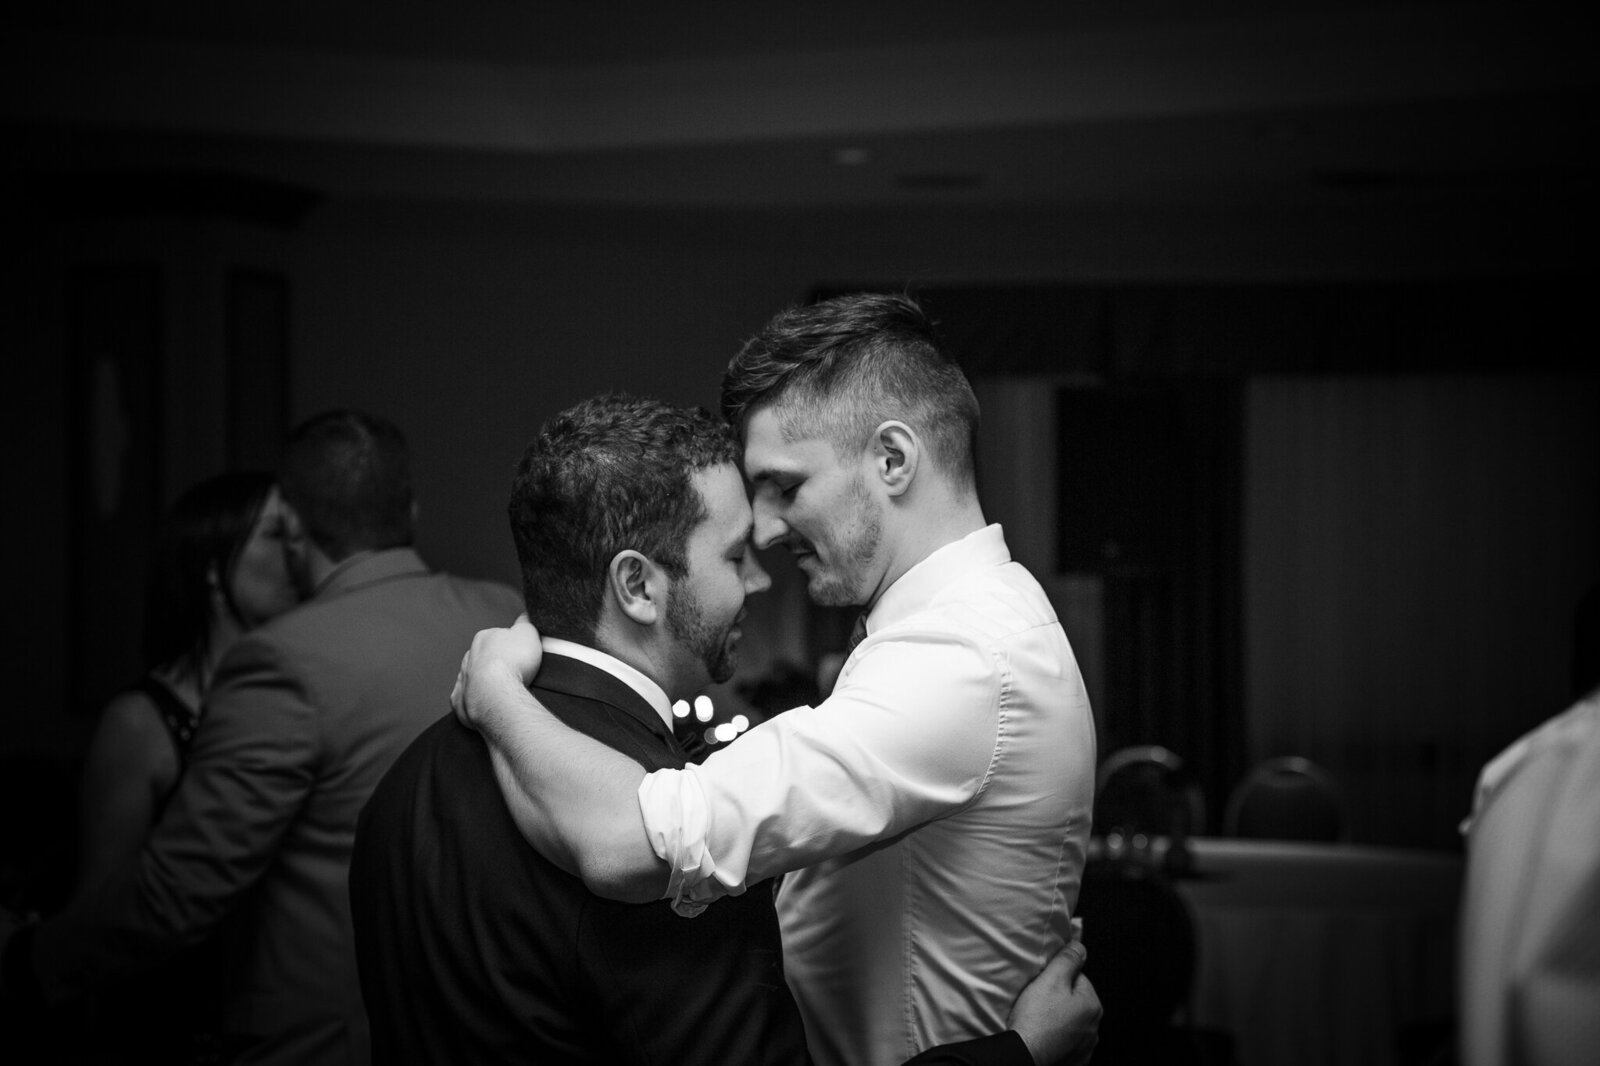 same sex couple embrace during dance at wedding reception.